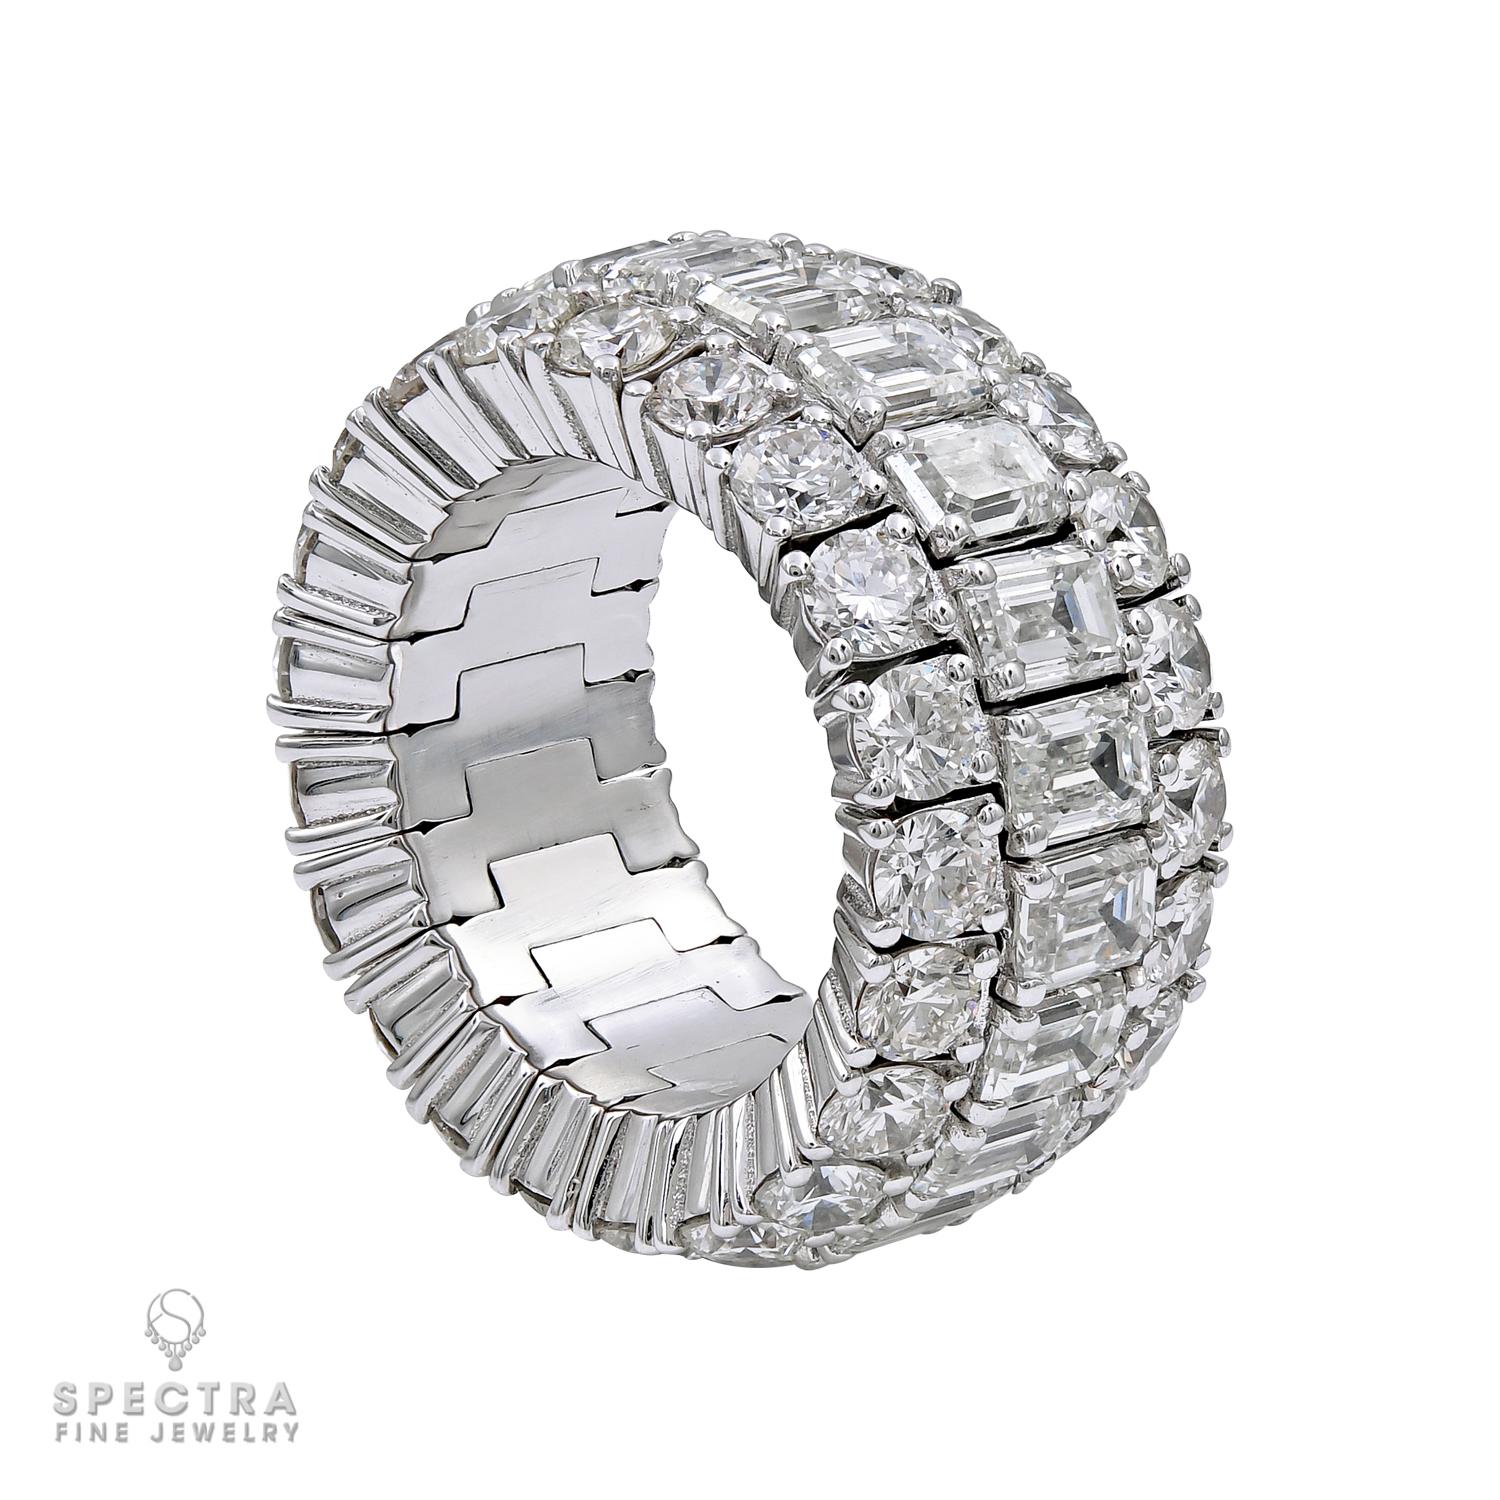 Introducing the epitome of elegance and flexibility in the world of fine jewelry: the Spectra Fine Jewelry Stretchy Diamond Wedding Band.

This stunning piece features three radiant rows of diamonds, each designed to captivate the eye and steal your